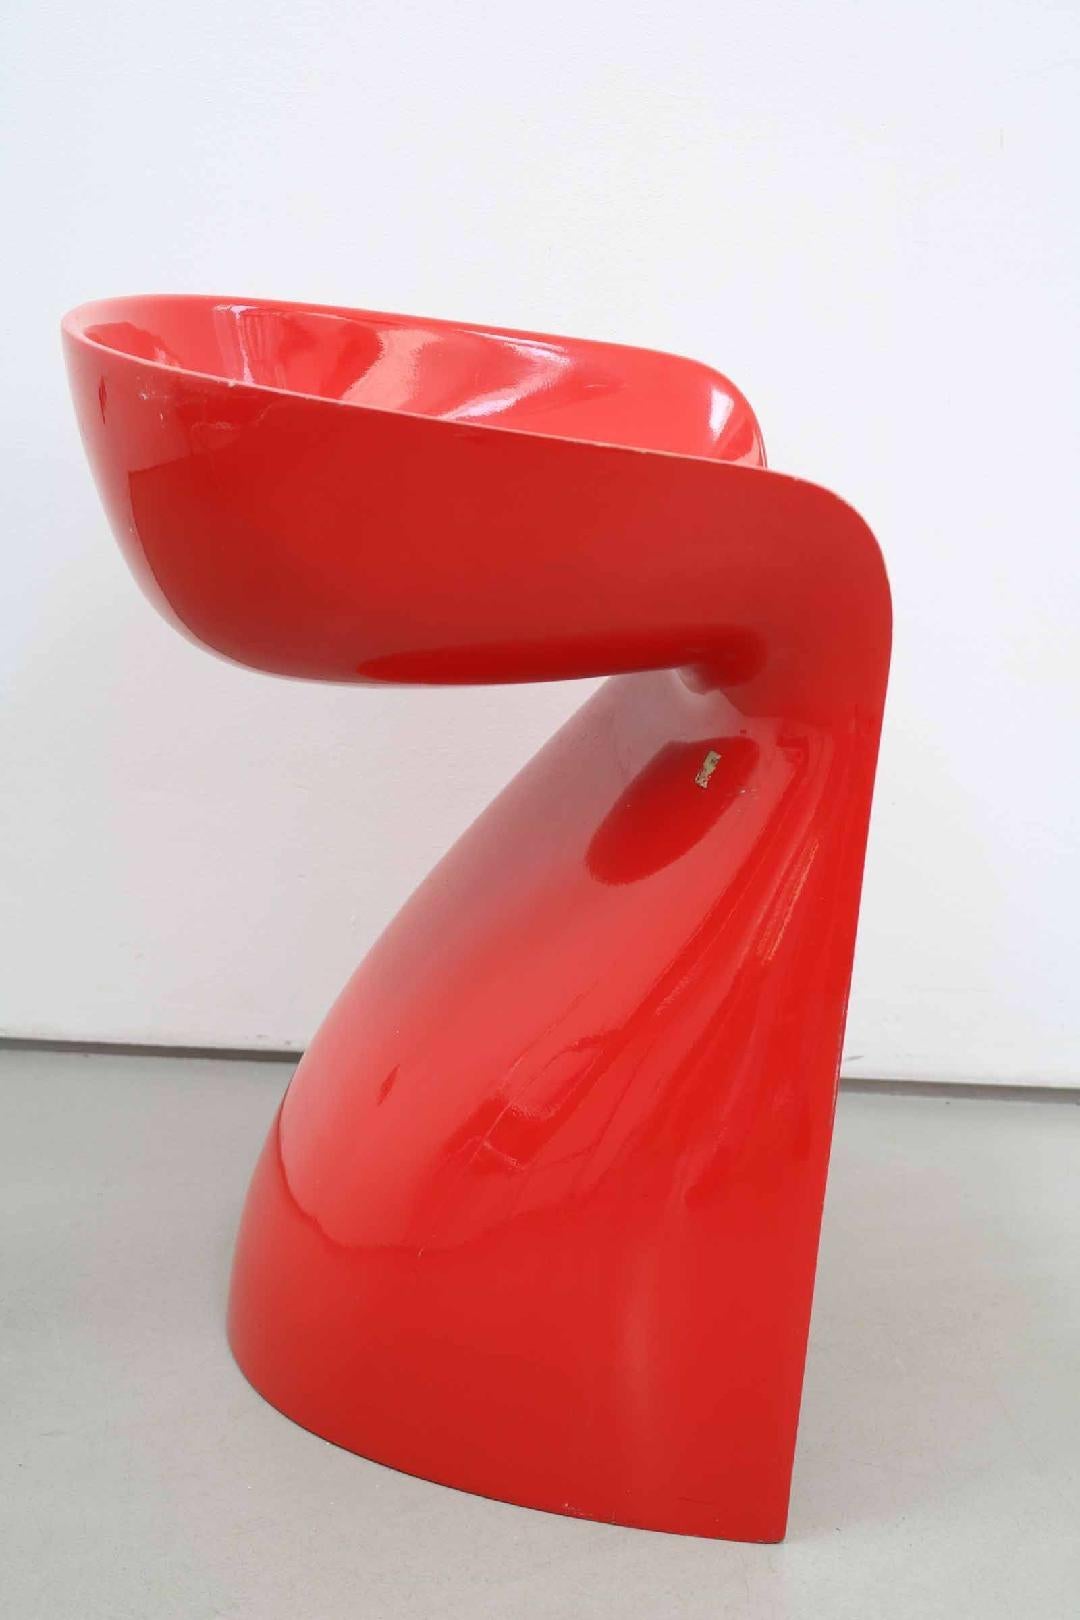 Winifred Staeb Hocker für Form + Life Collection'S im Space Age Design in Rot.